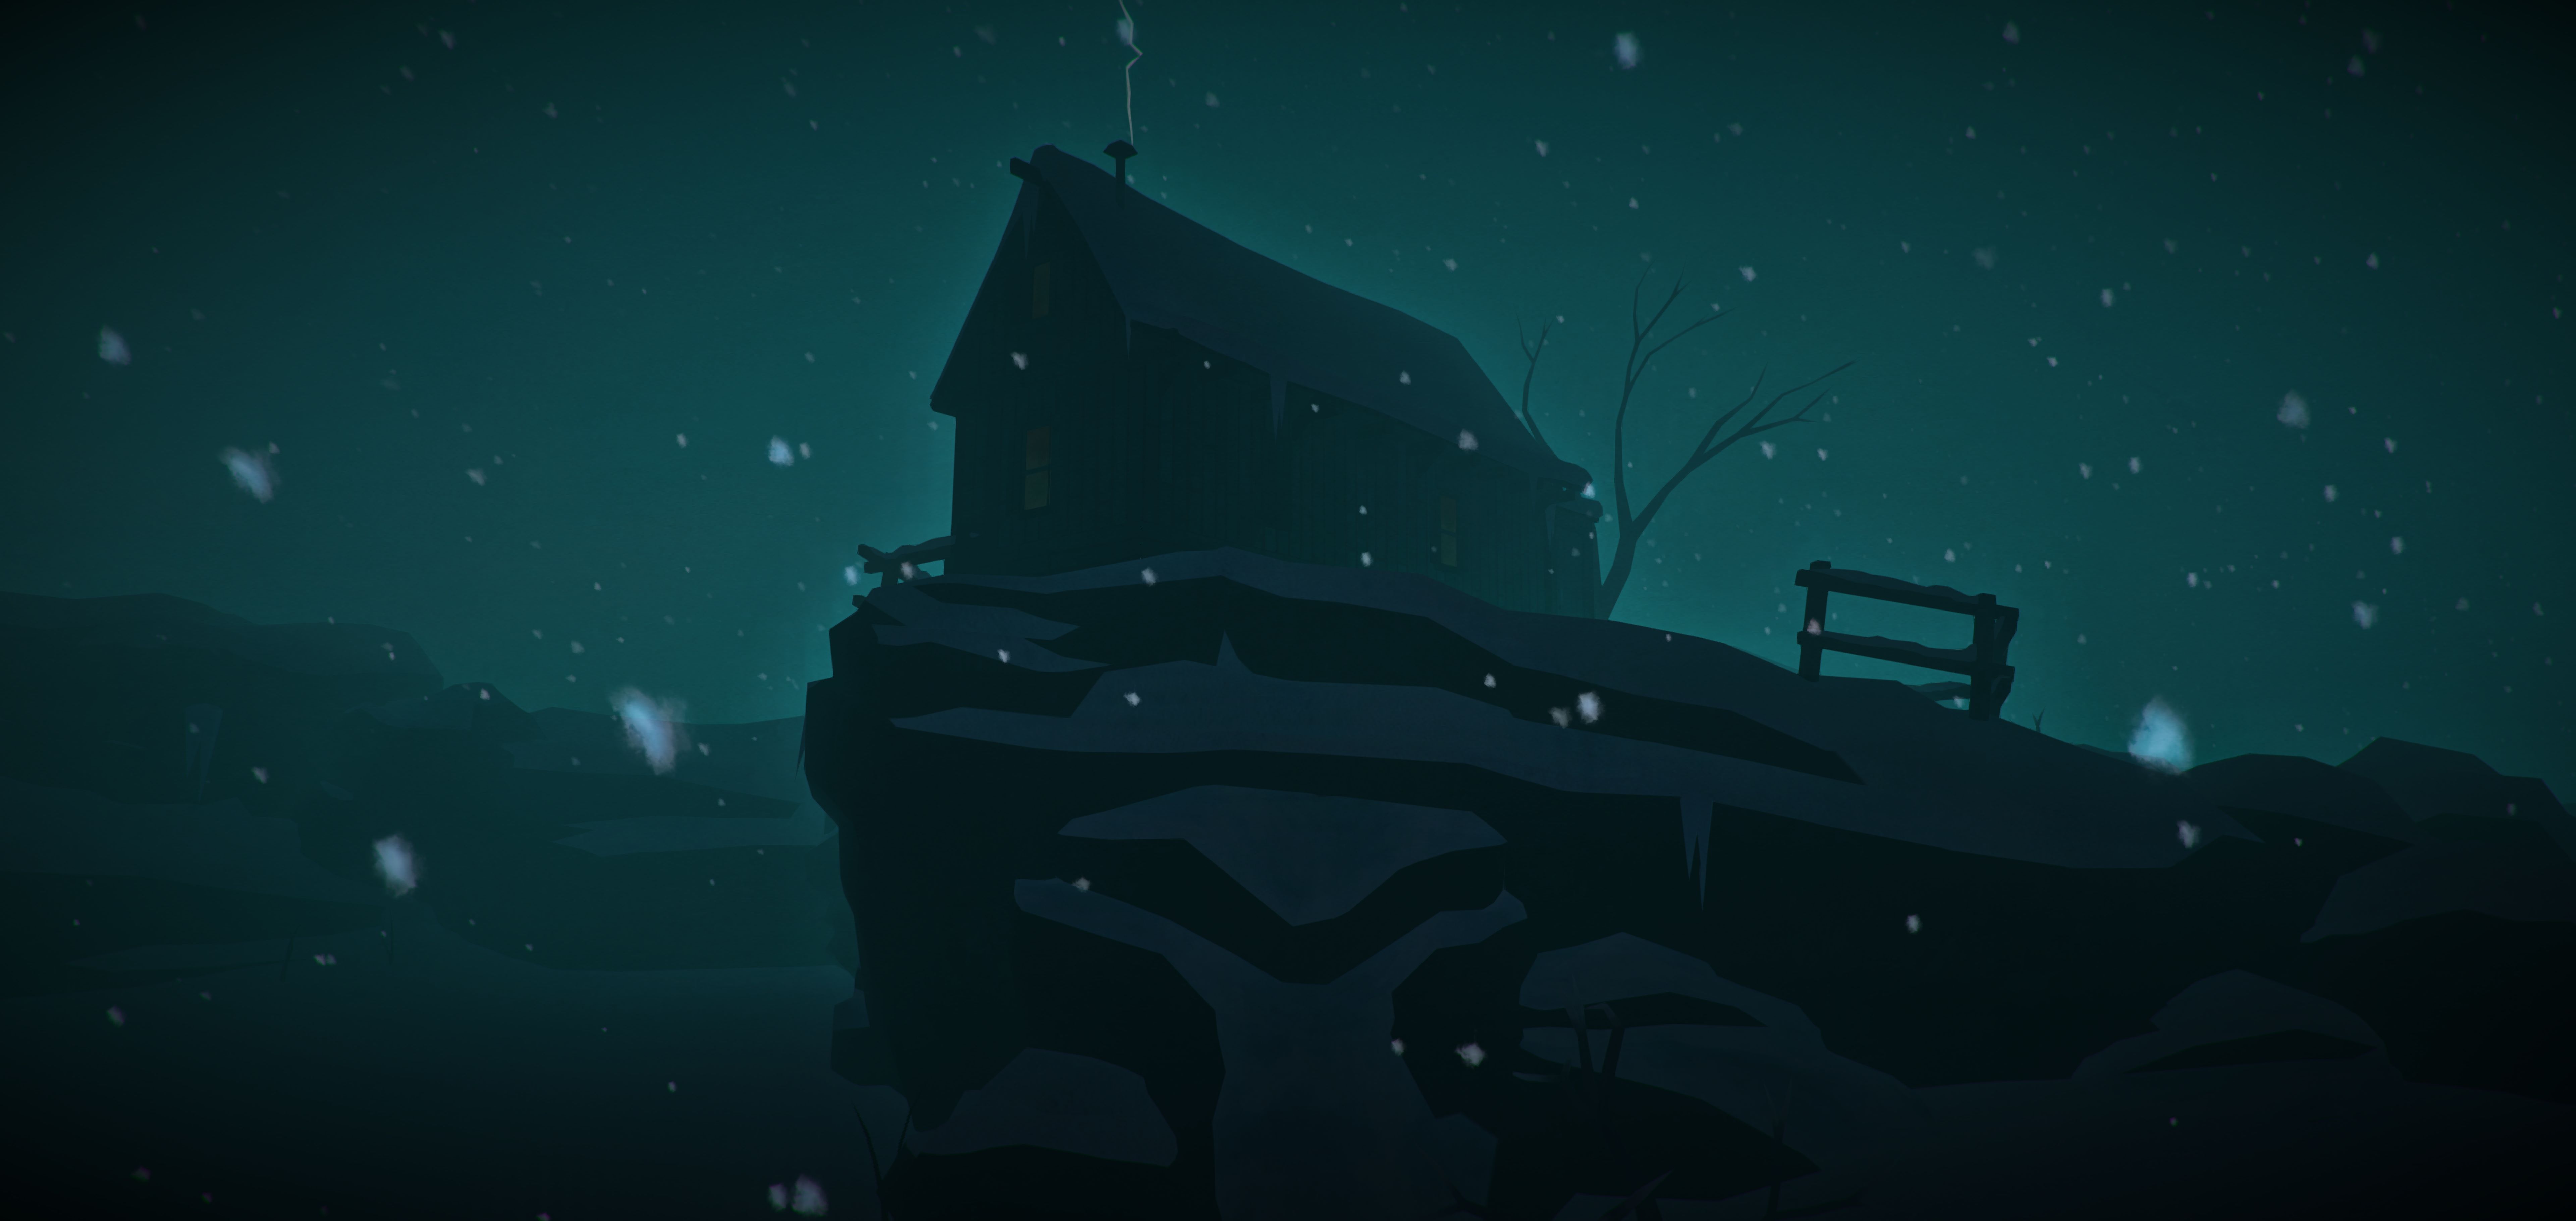 Free download The Long Dark 5k Retina Ultra HD Wallpaper Background Image  [7680x3640] for your Desktop, Mobile & Tablet | Explore 37+ The Long Dark  Wallpapers | The Dark Night Wallpaper, The